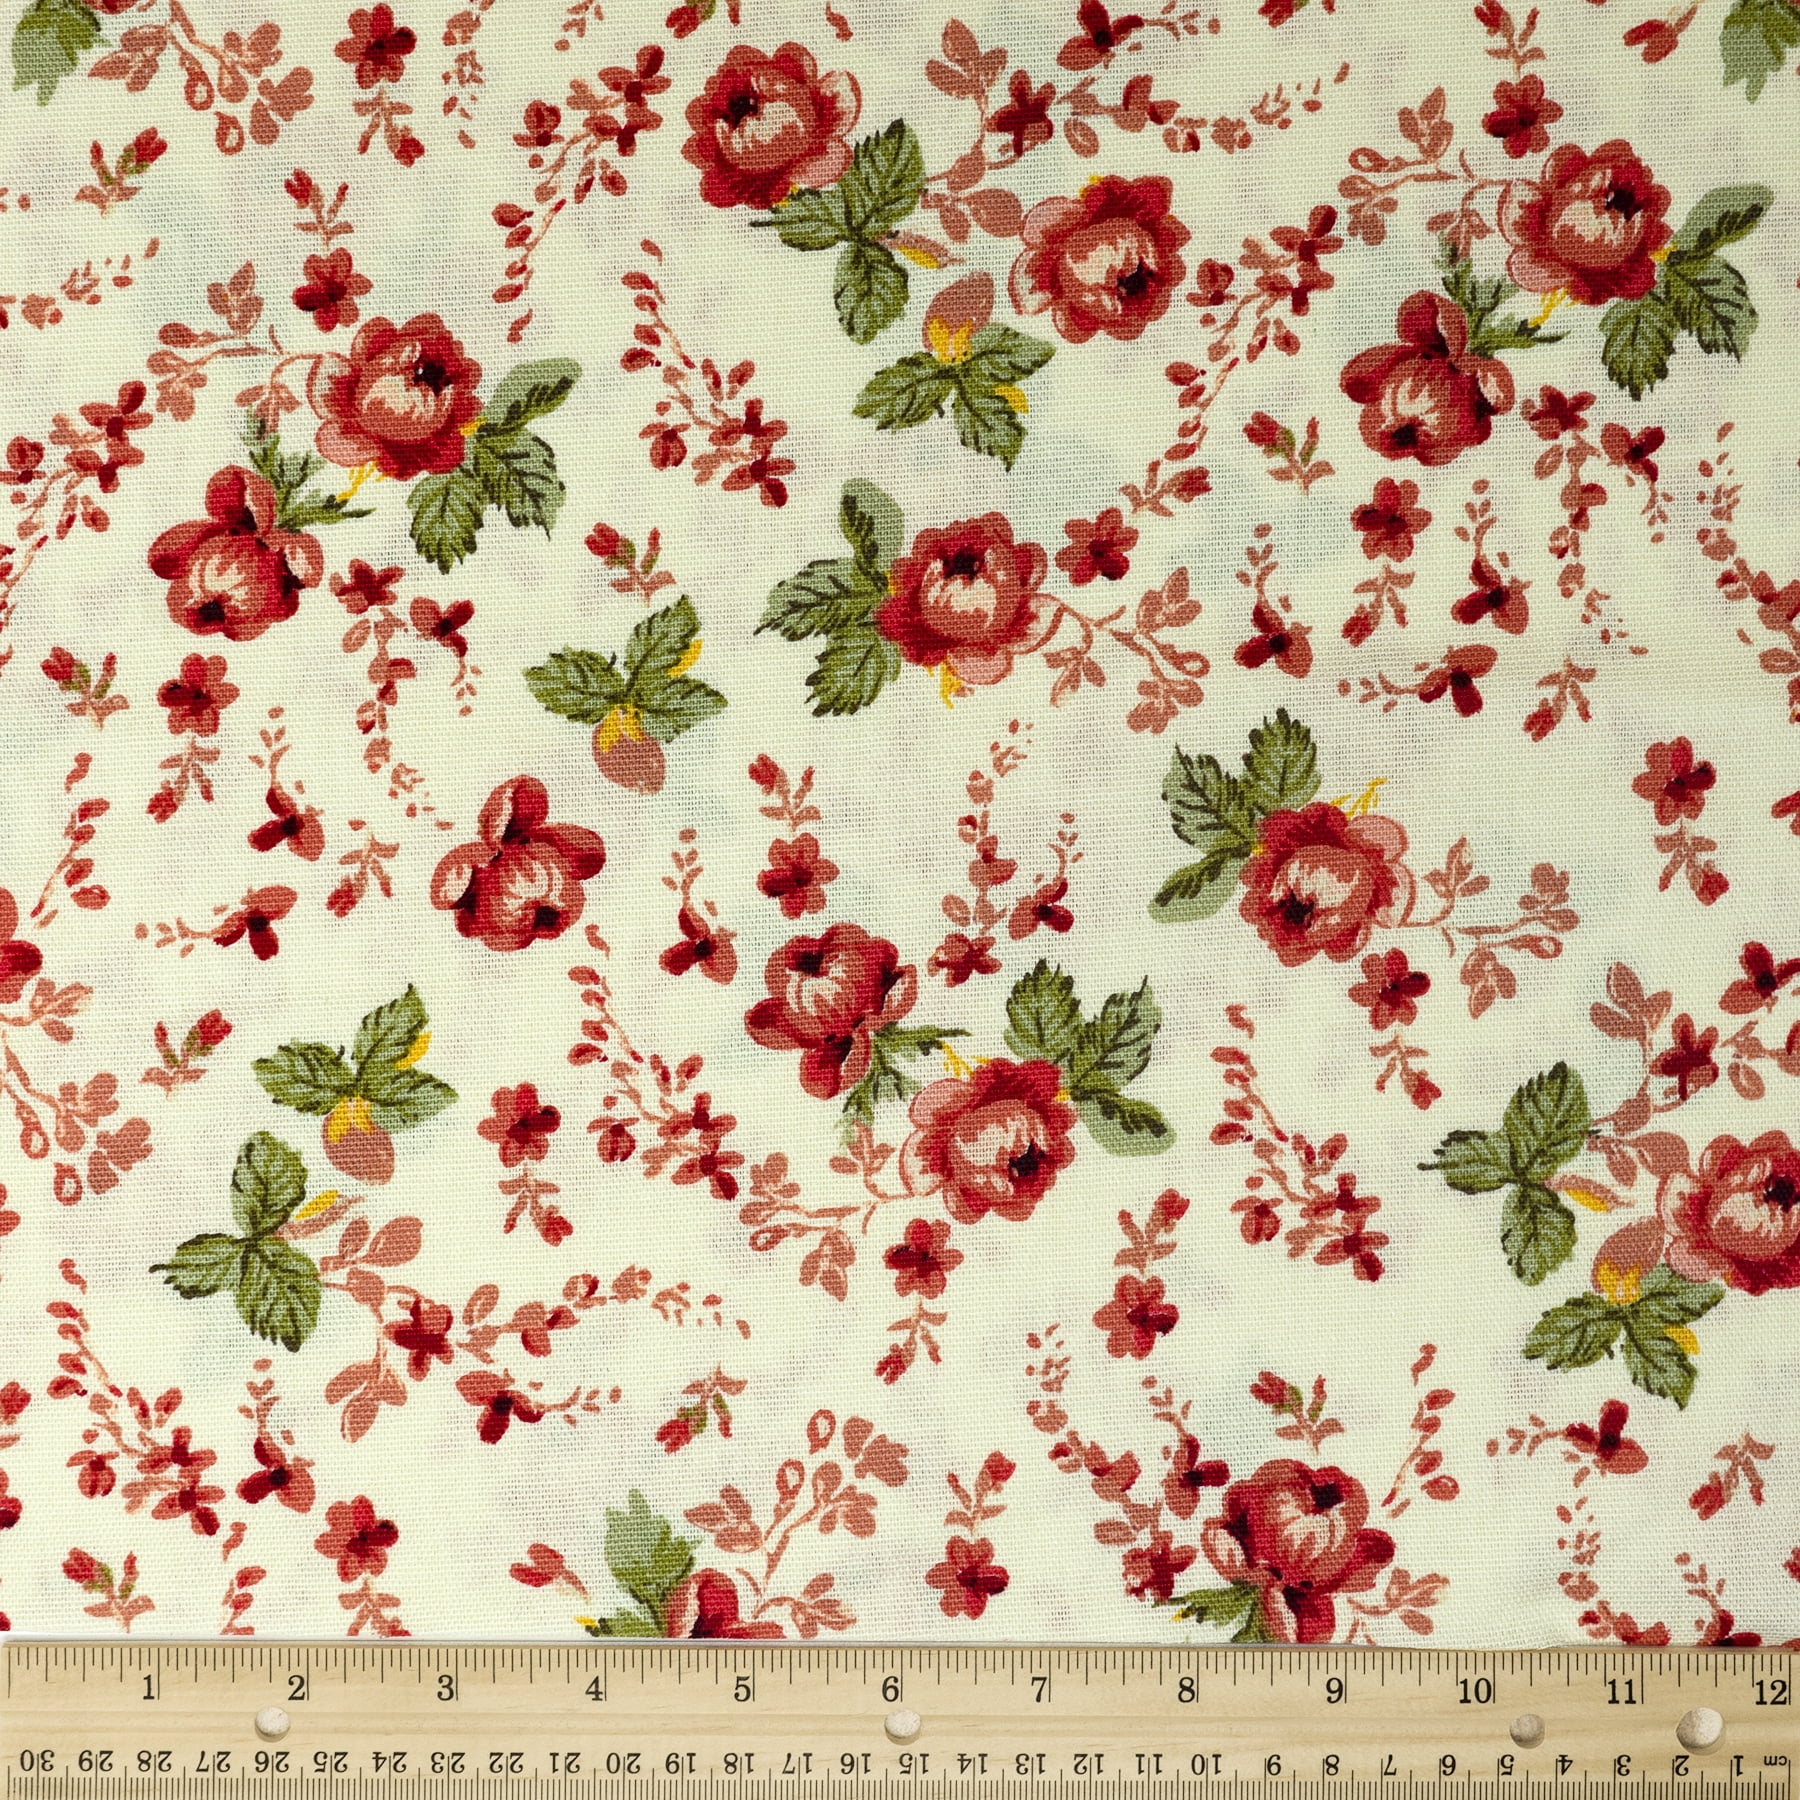 Vintage Cotton Fabric BLUE,BROWN,CREAM,RED CALICO FLORAL STRIPE 1 Yd/44" 